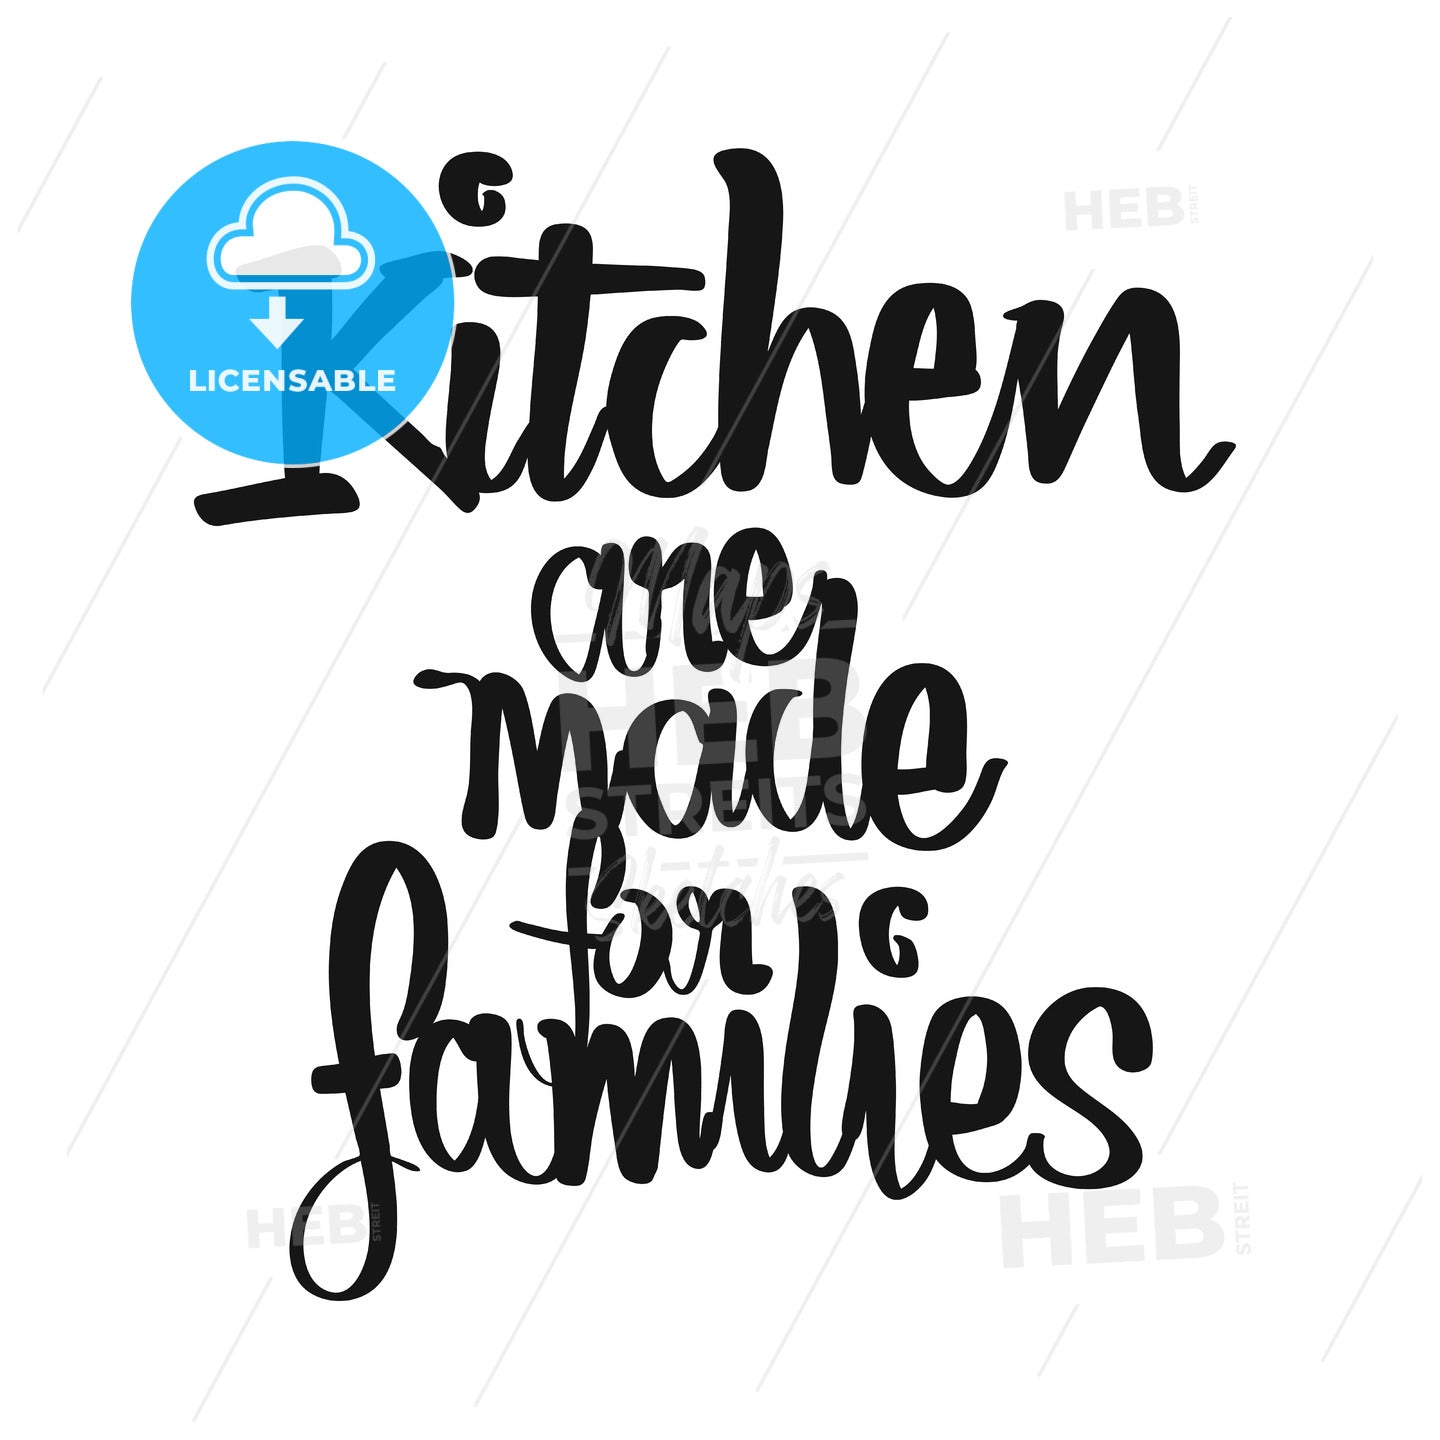 Kitchen Are Made For Families handwritten lettering – instant download